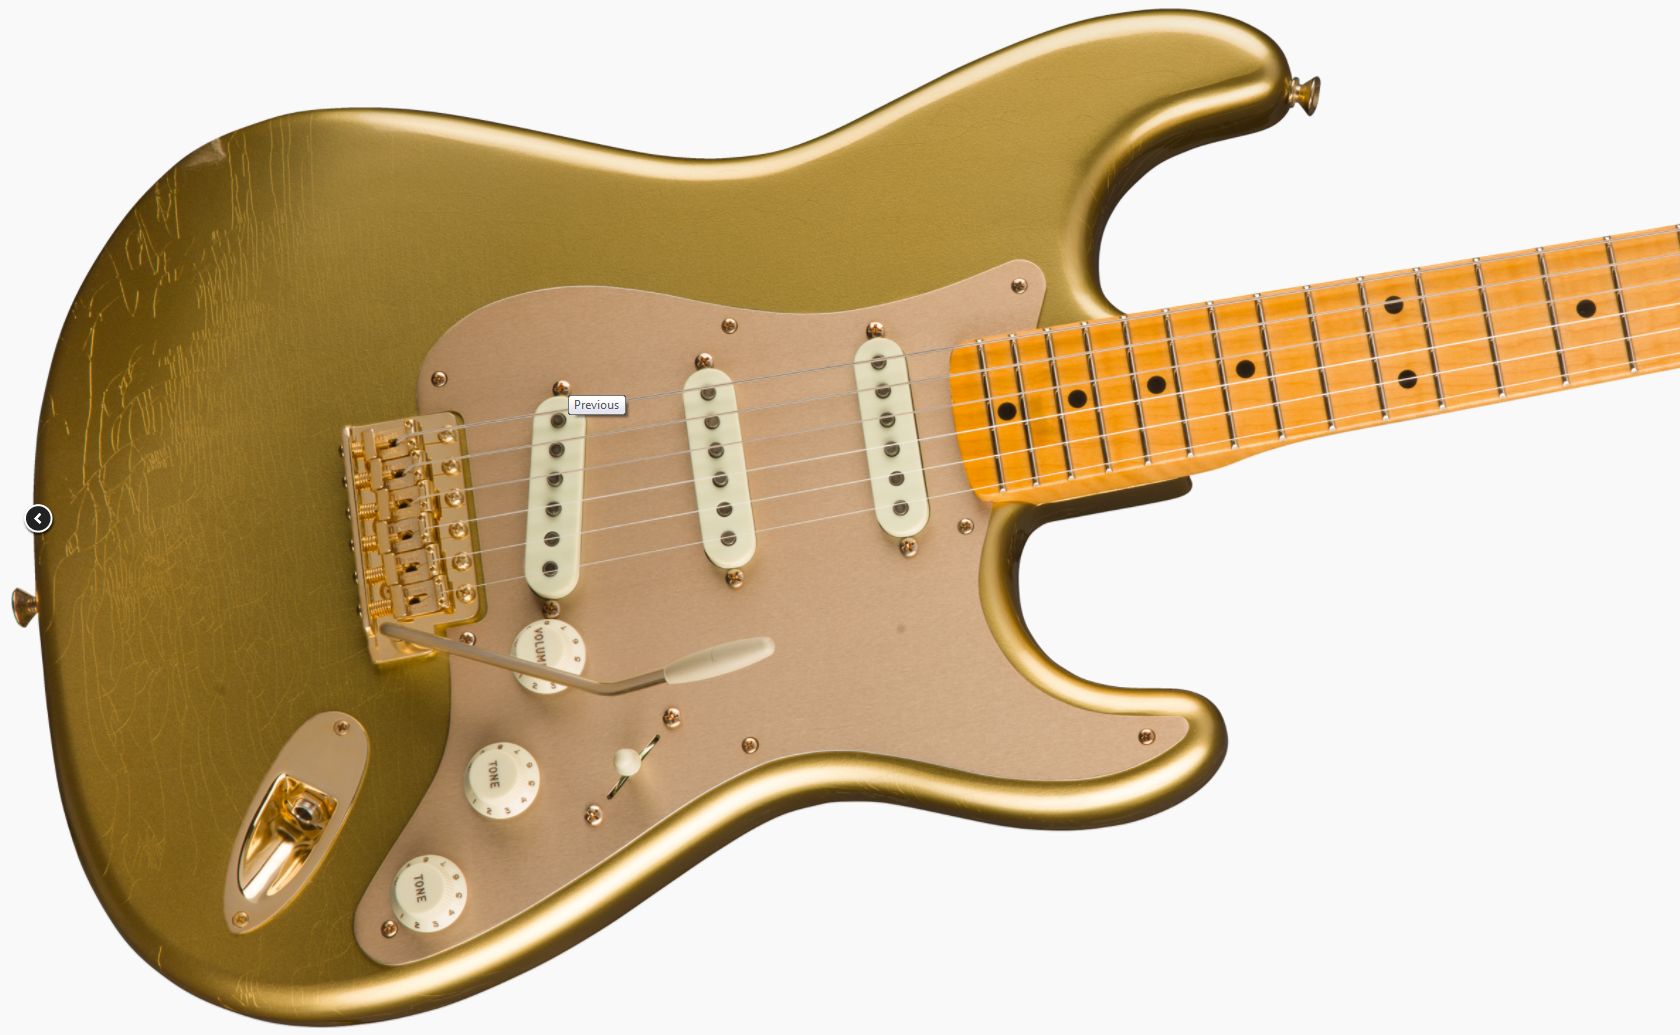 Fender Customshop LIMITED EDITION CLOSET CLASSIC HLE STRATOCASTER